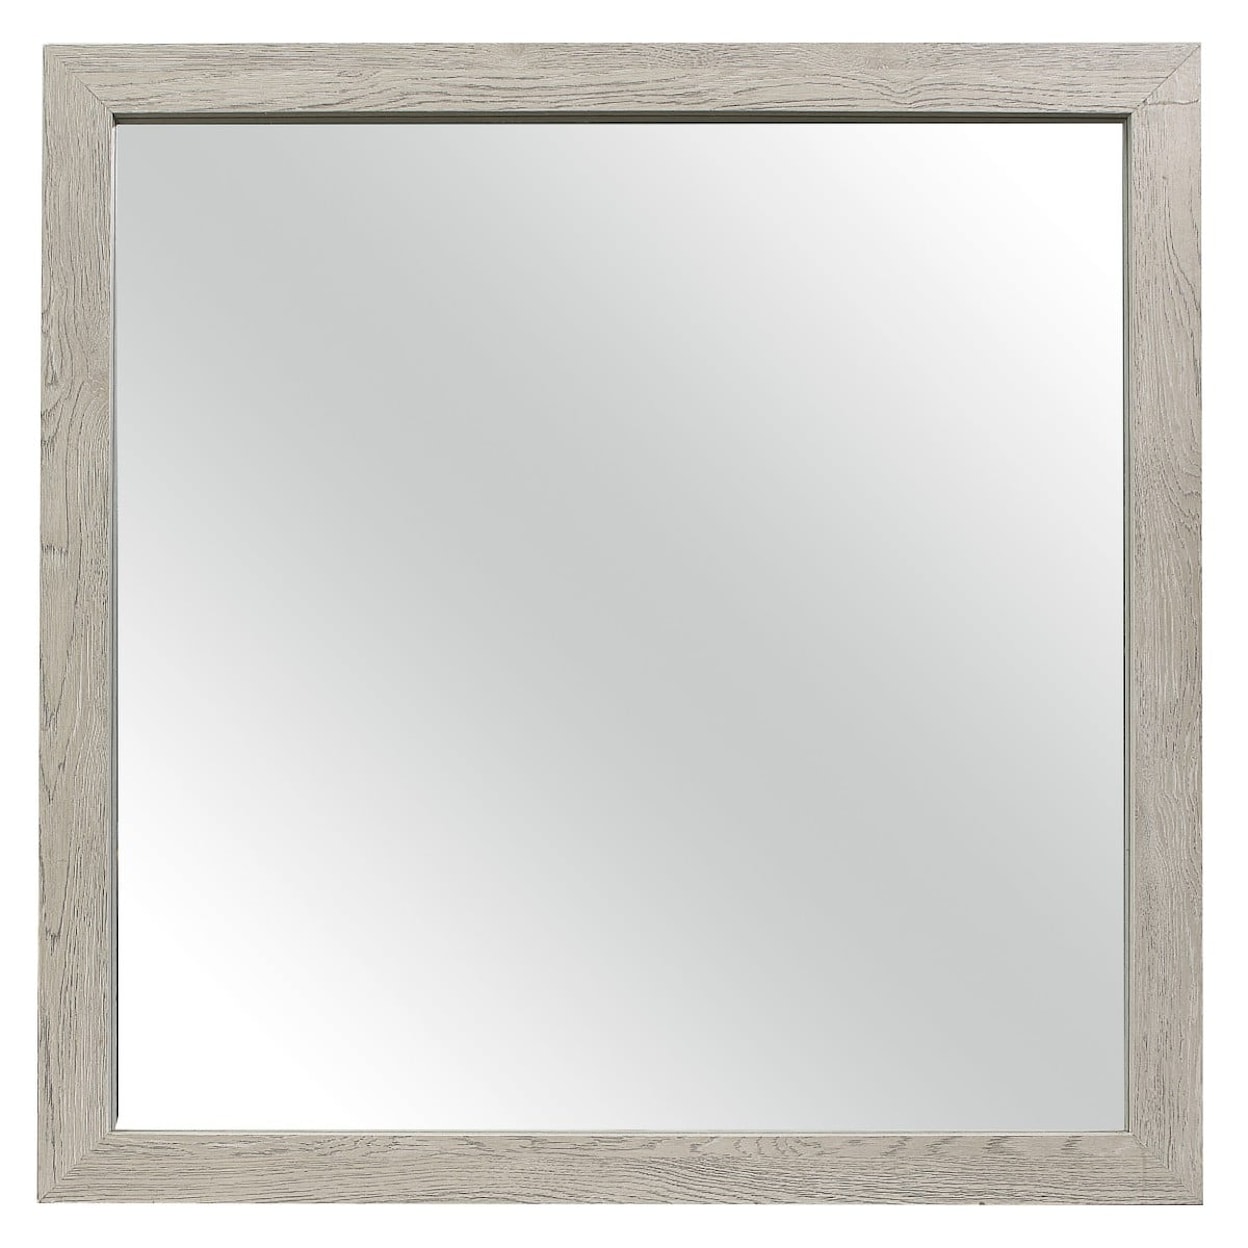 Homelegance Quinby Mirror